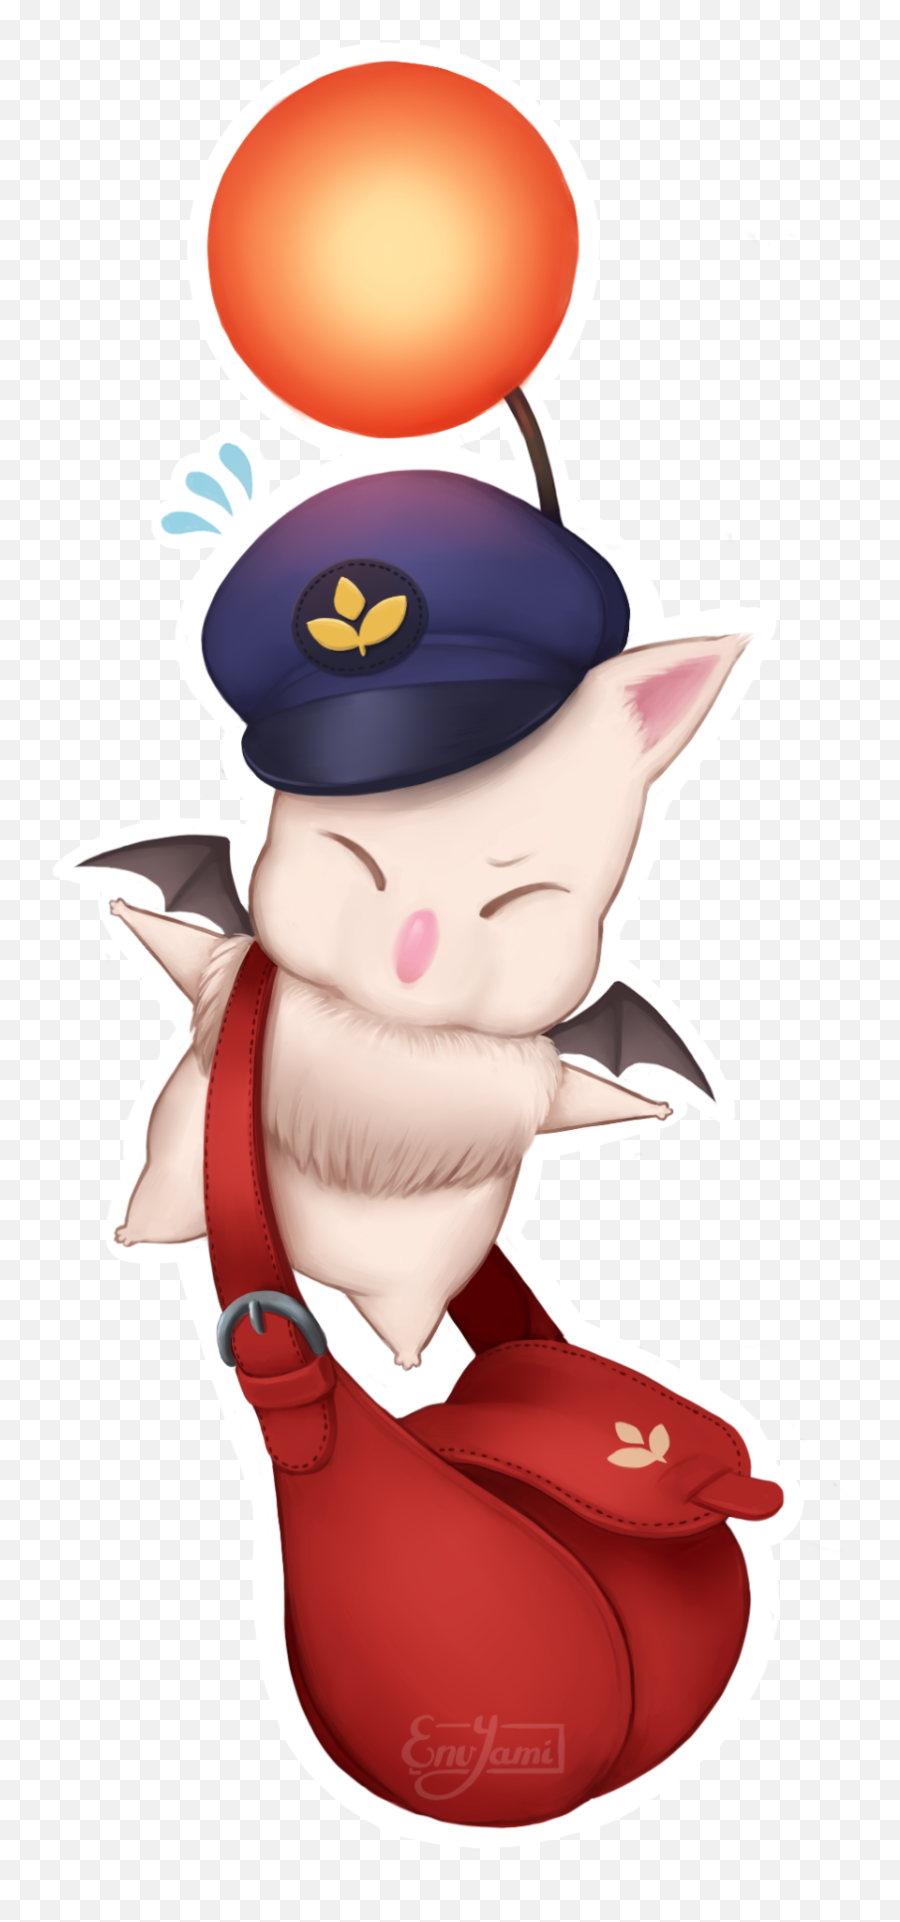 Delivery Moogle From Final Fantasy Xiv - Delivery Moogle Png,Moogle Png